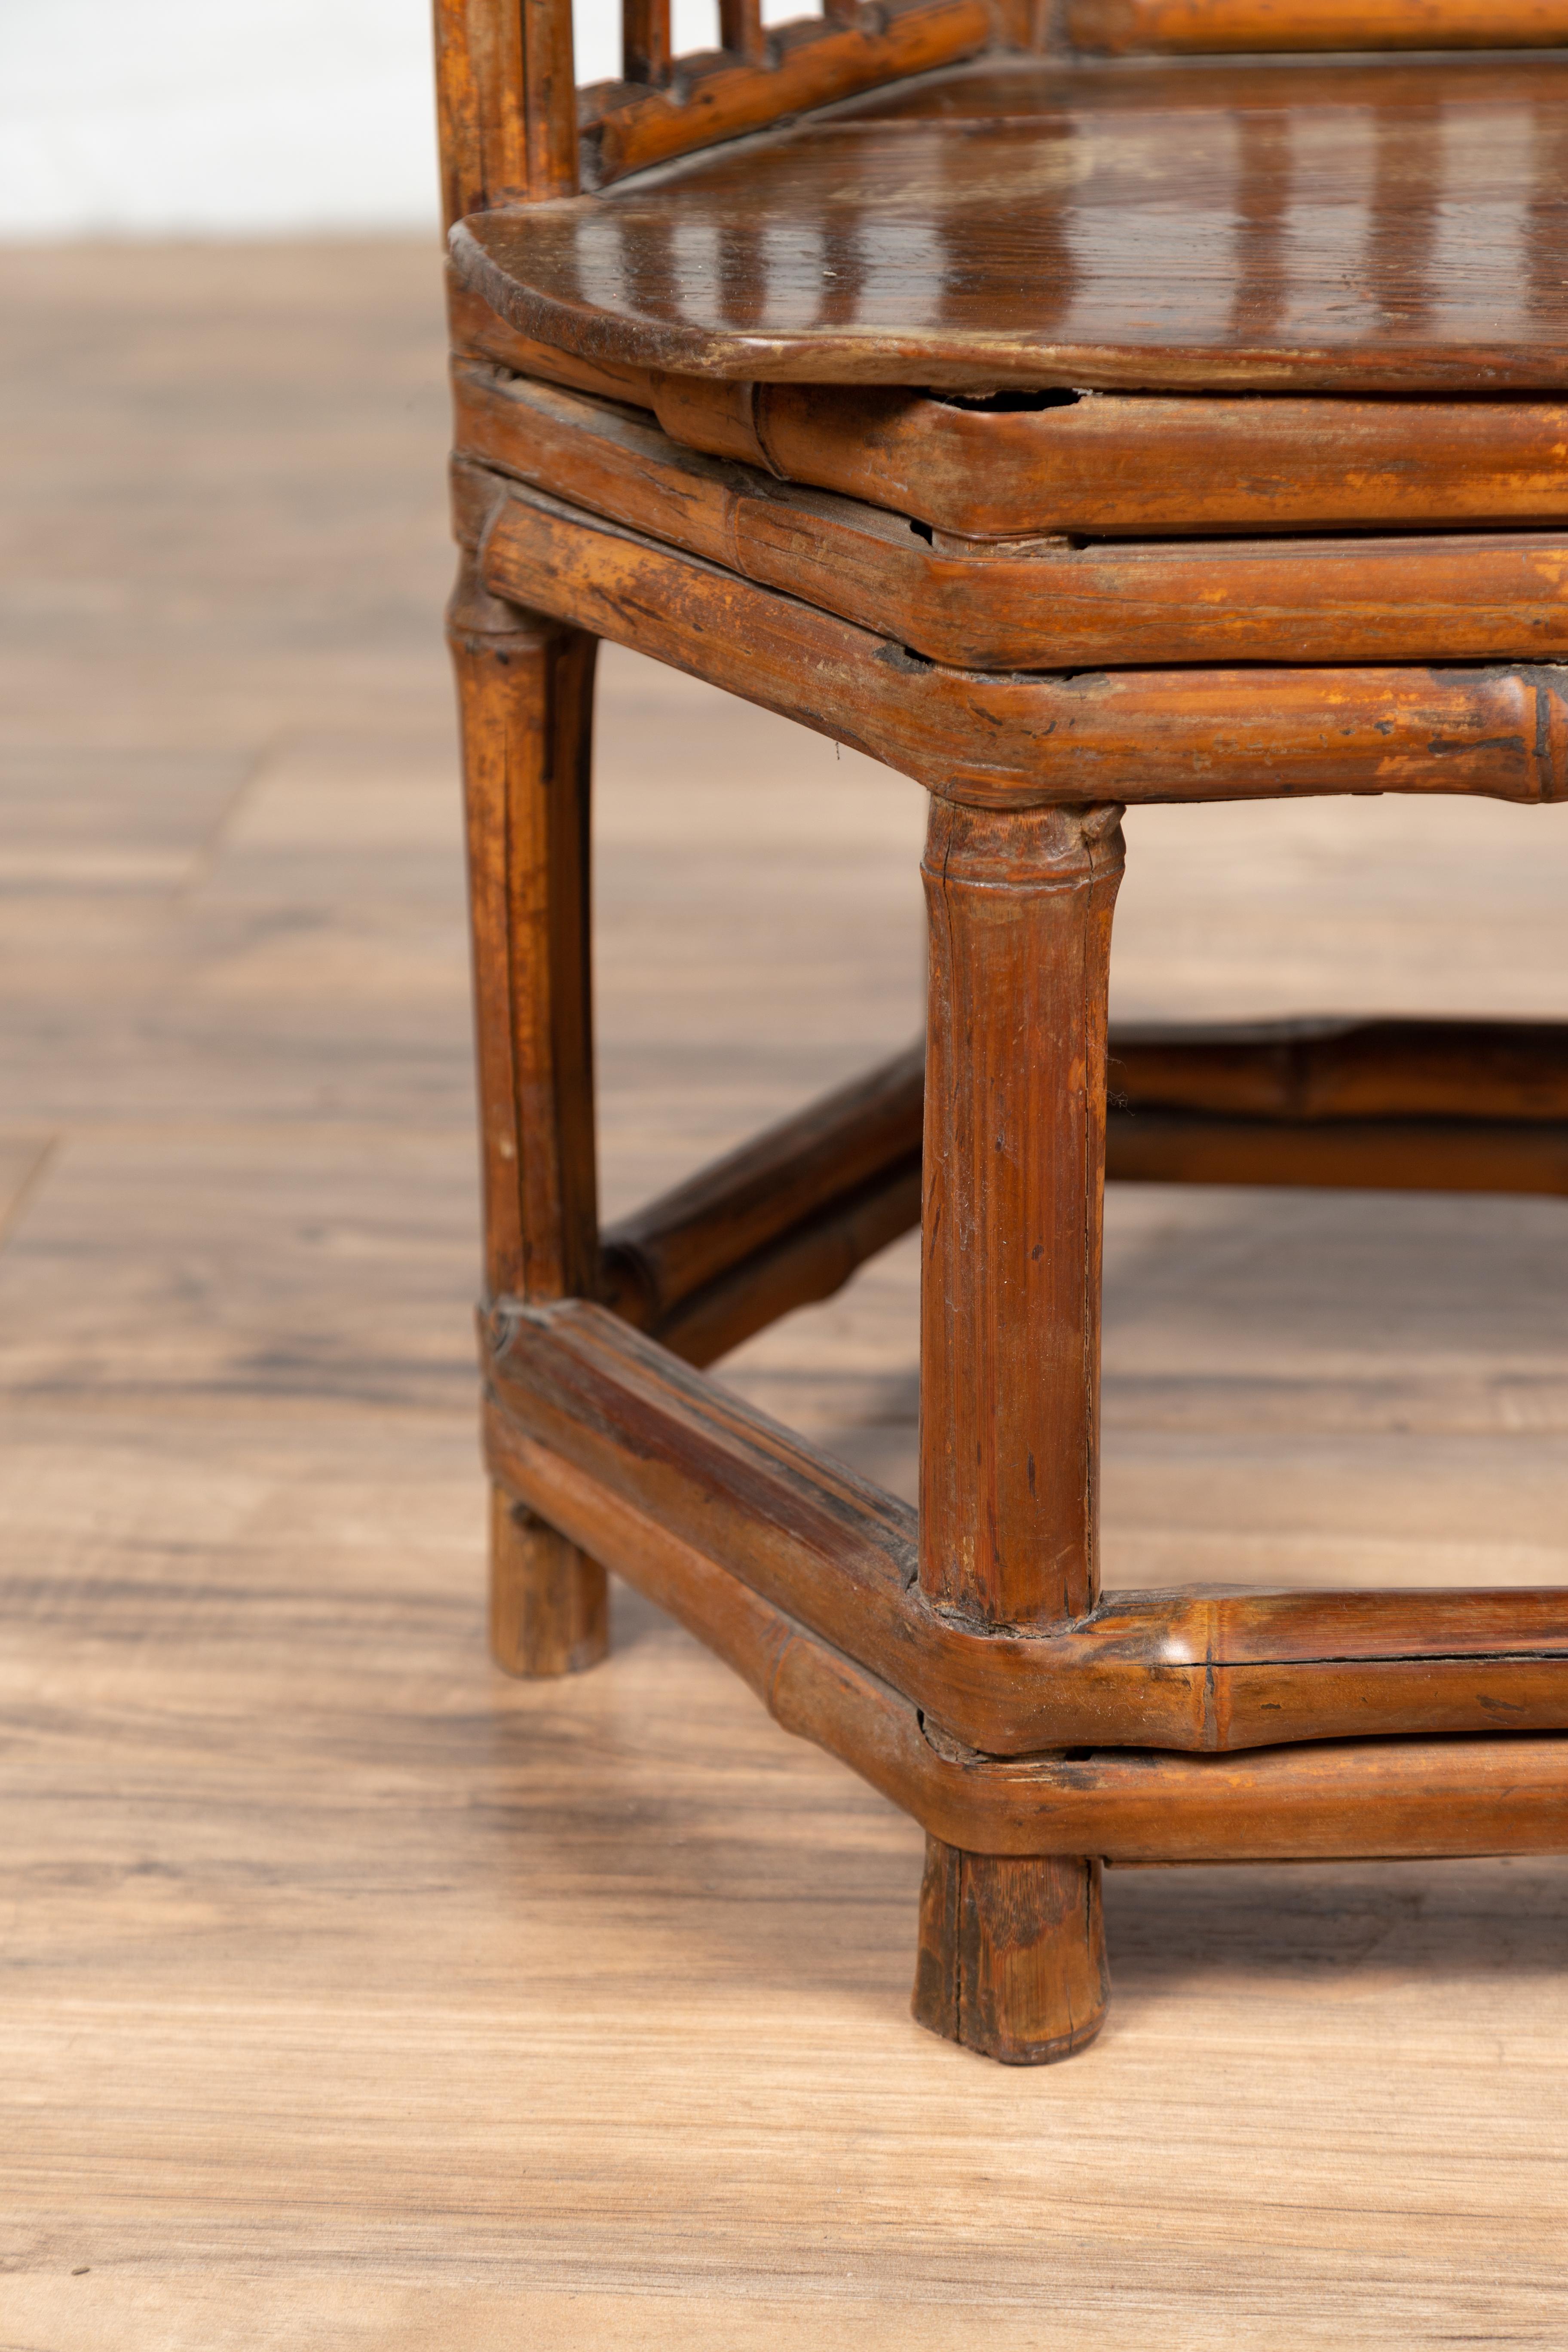 19th Century Chinese Antique Child's Corner Chair with Bamboo Frame and Hexagonal Base For Sale